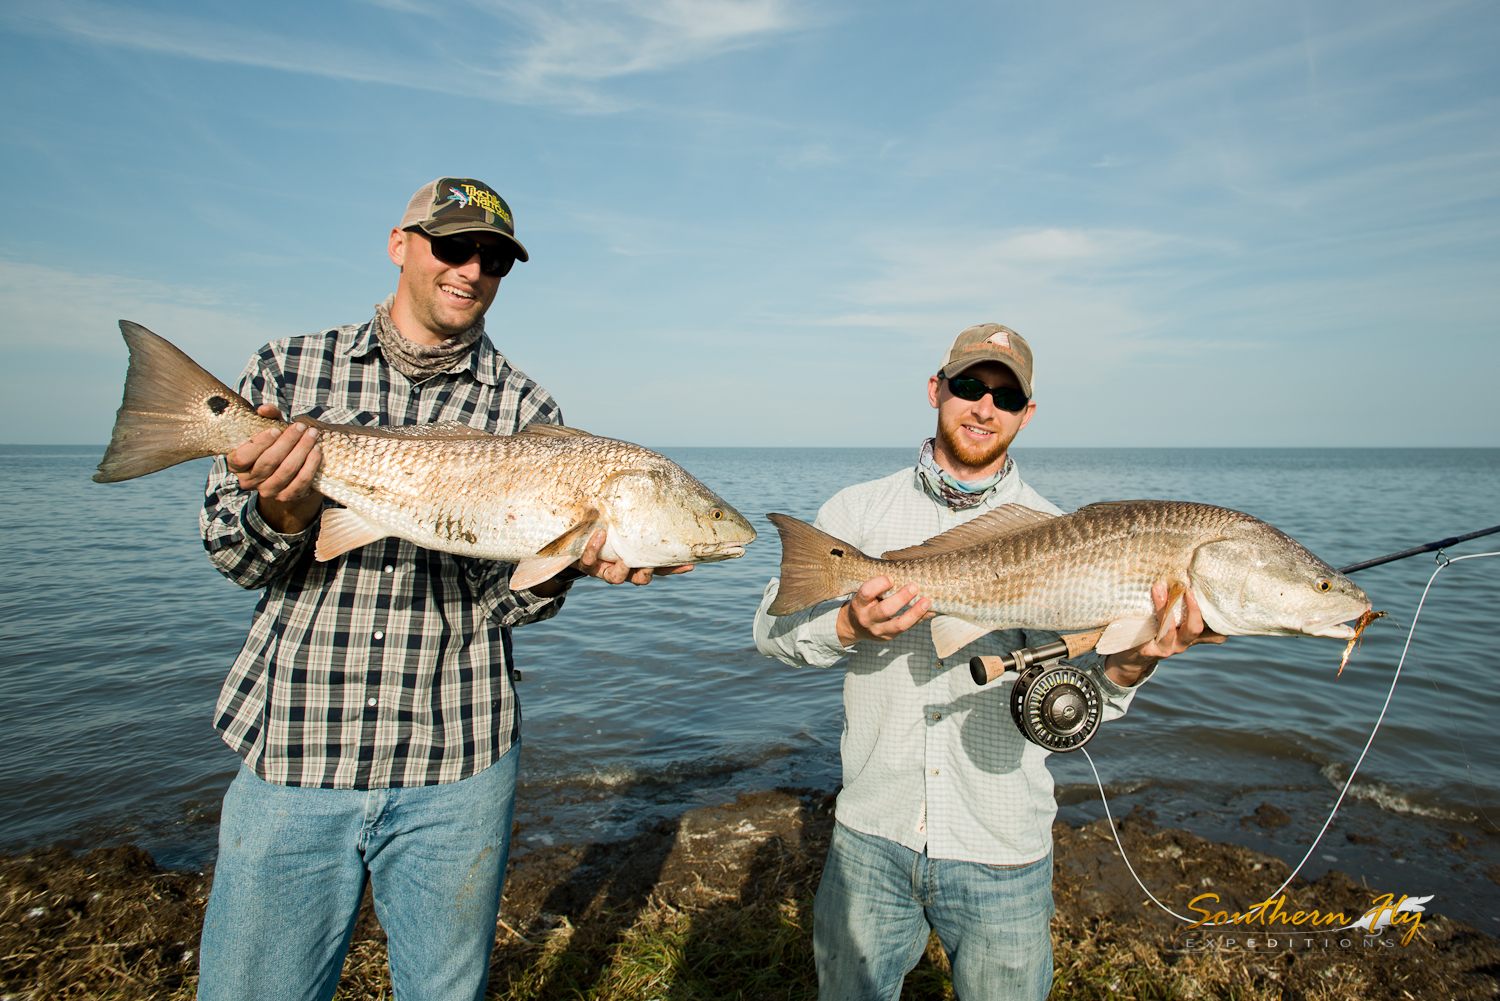 West Virginia Anglers Fly Fishing New Orleans Southern Fly Expeditions